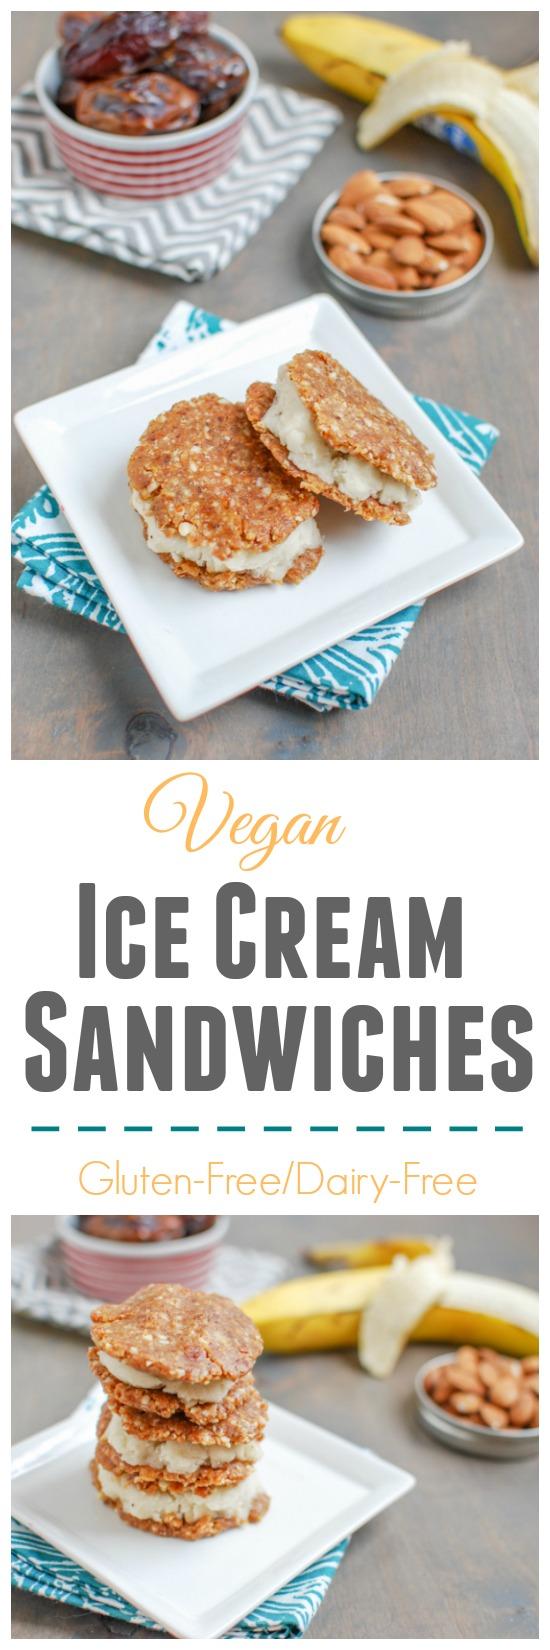 Made with just a 4 ingredients, these Vegan Ice Cream Sandwiches are gluten-free, dairy-free and make the perfect summer treat!